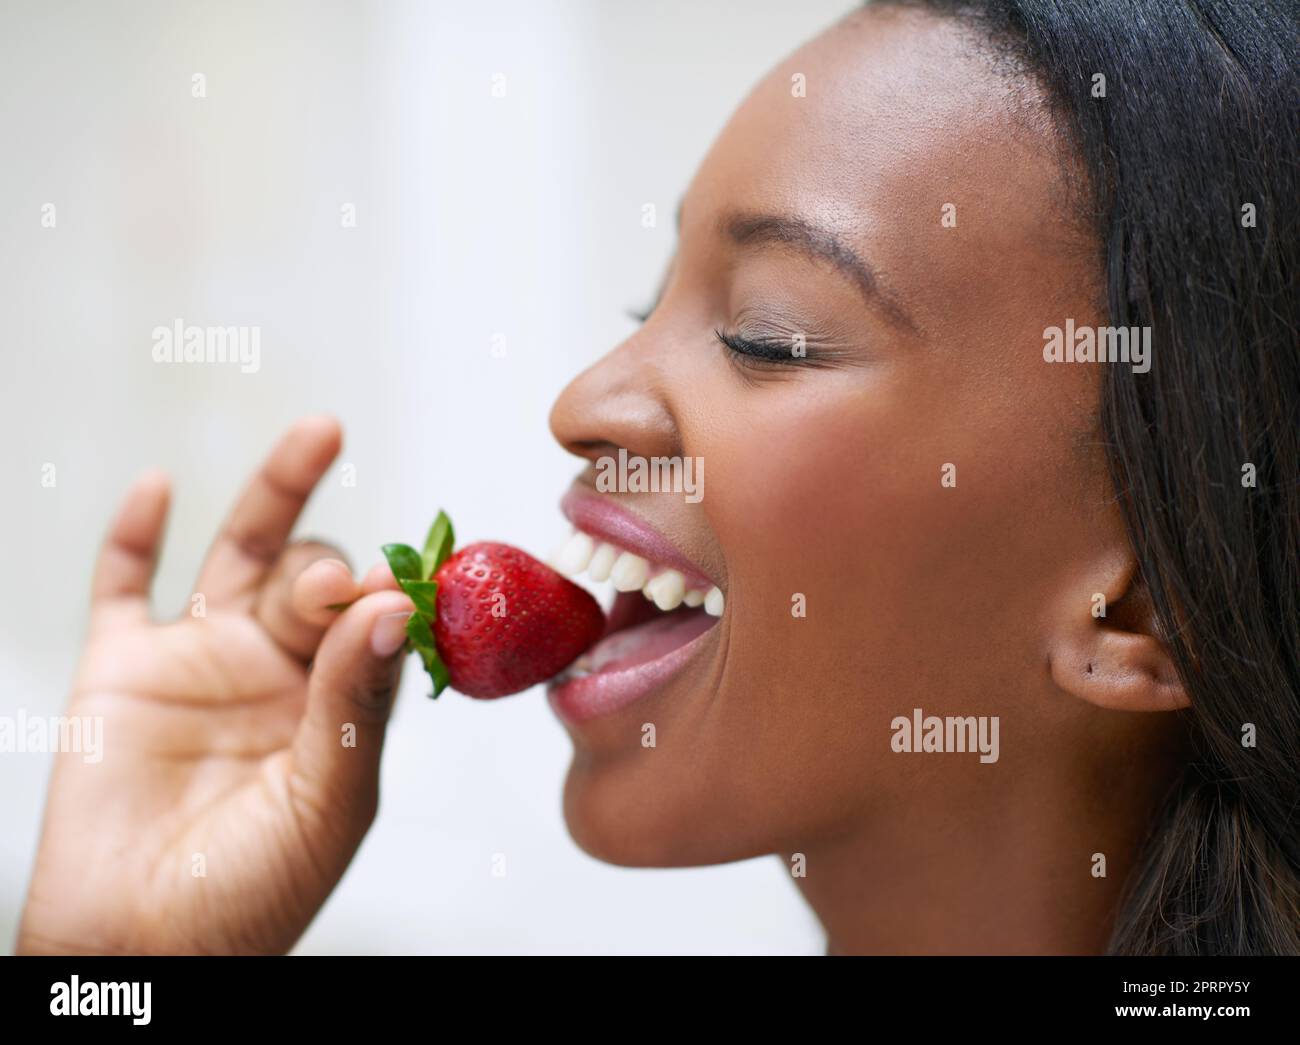 Its worth every bite. a beautiful young woman eating strawberries. Stock Photo